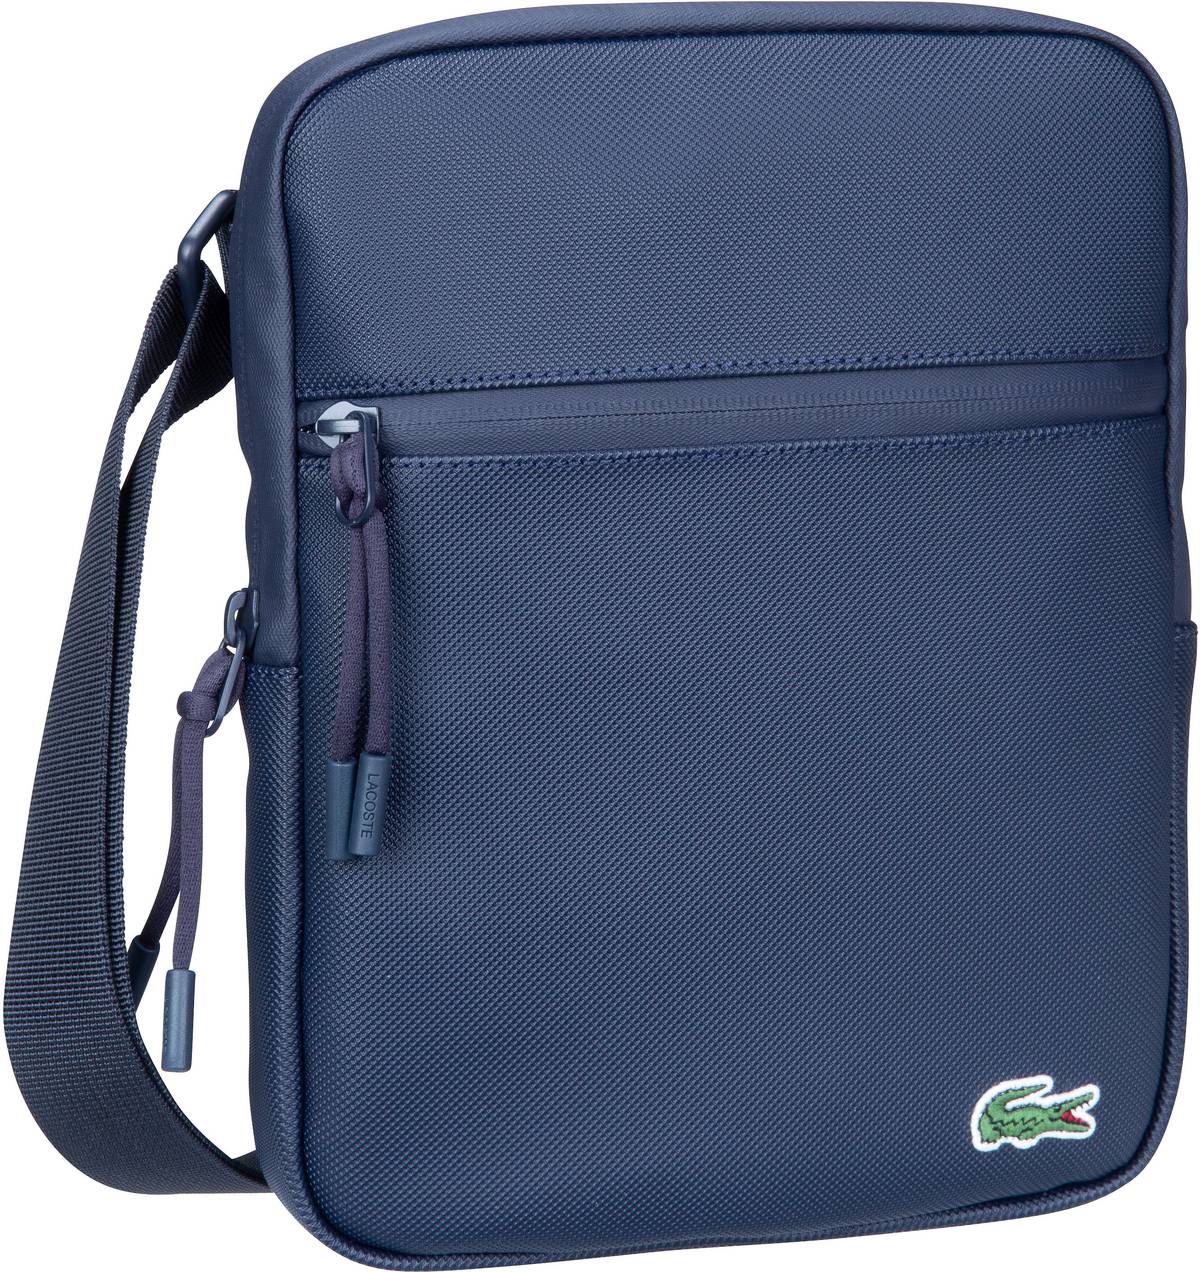 Lacoste LCST Flat Crossover Bag 3308 - Eclipse